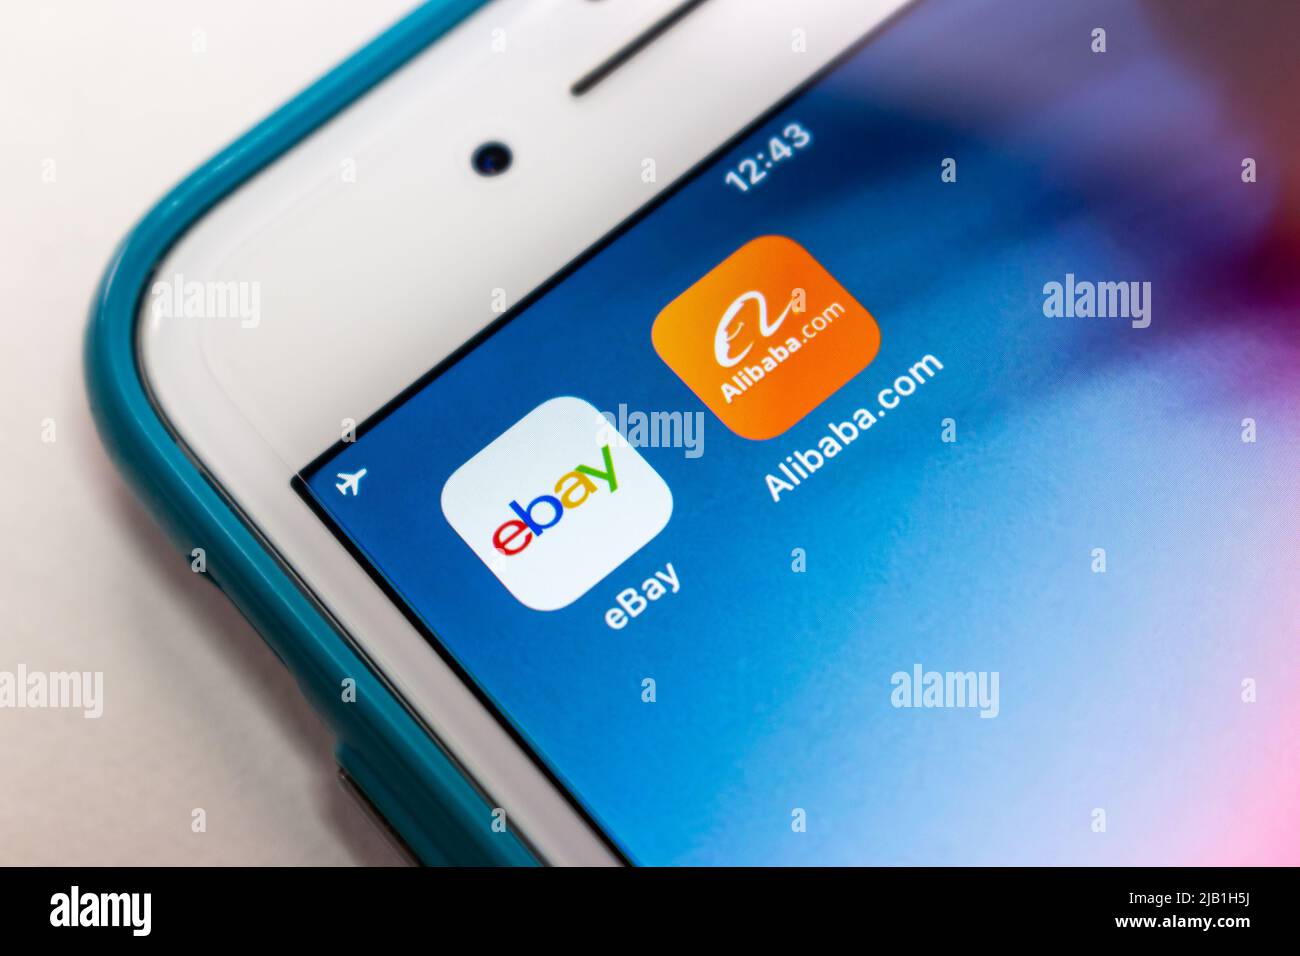 eBay and Alibaba apps on iPhone. eBay Inc. is an US multinational e-commerce corporation. Alibaba.com is an online B2B marketplace by Alibaba Group Stock Photo